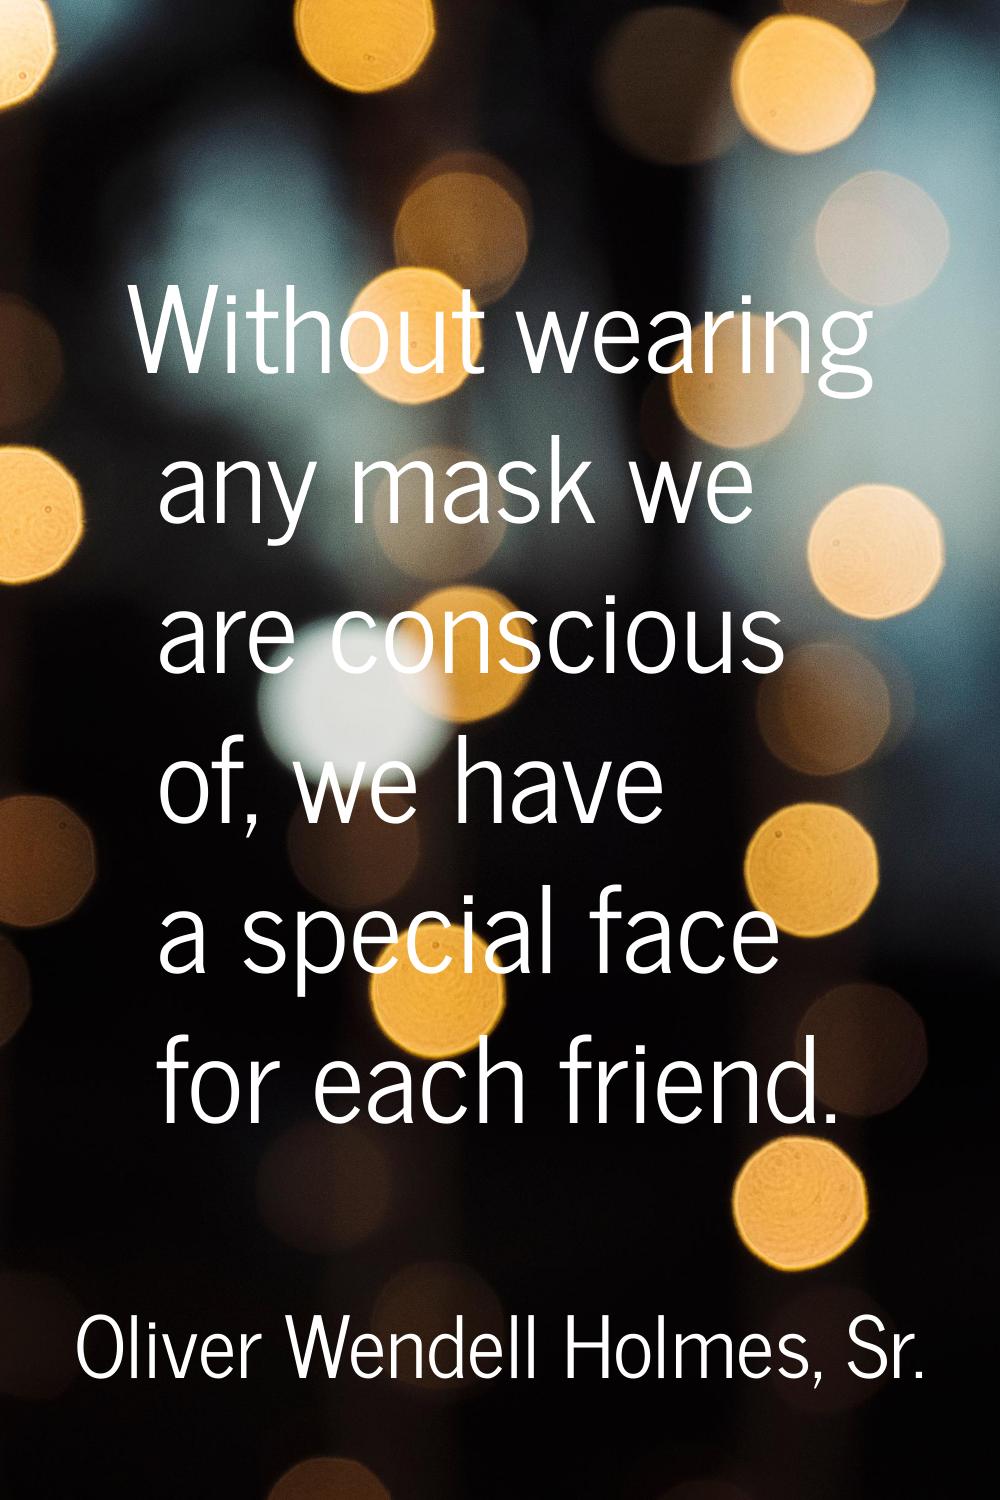 Without wearing any mask we are conscious of, we have a special face for each friend.